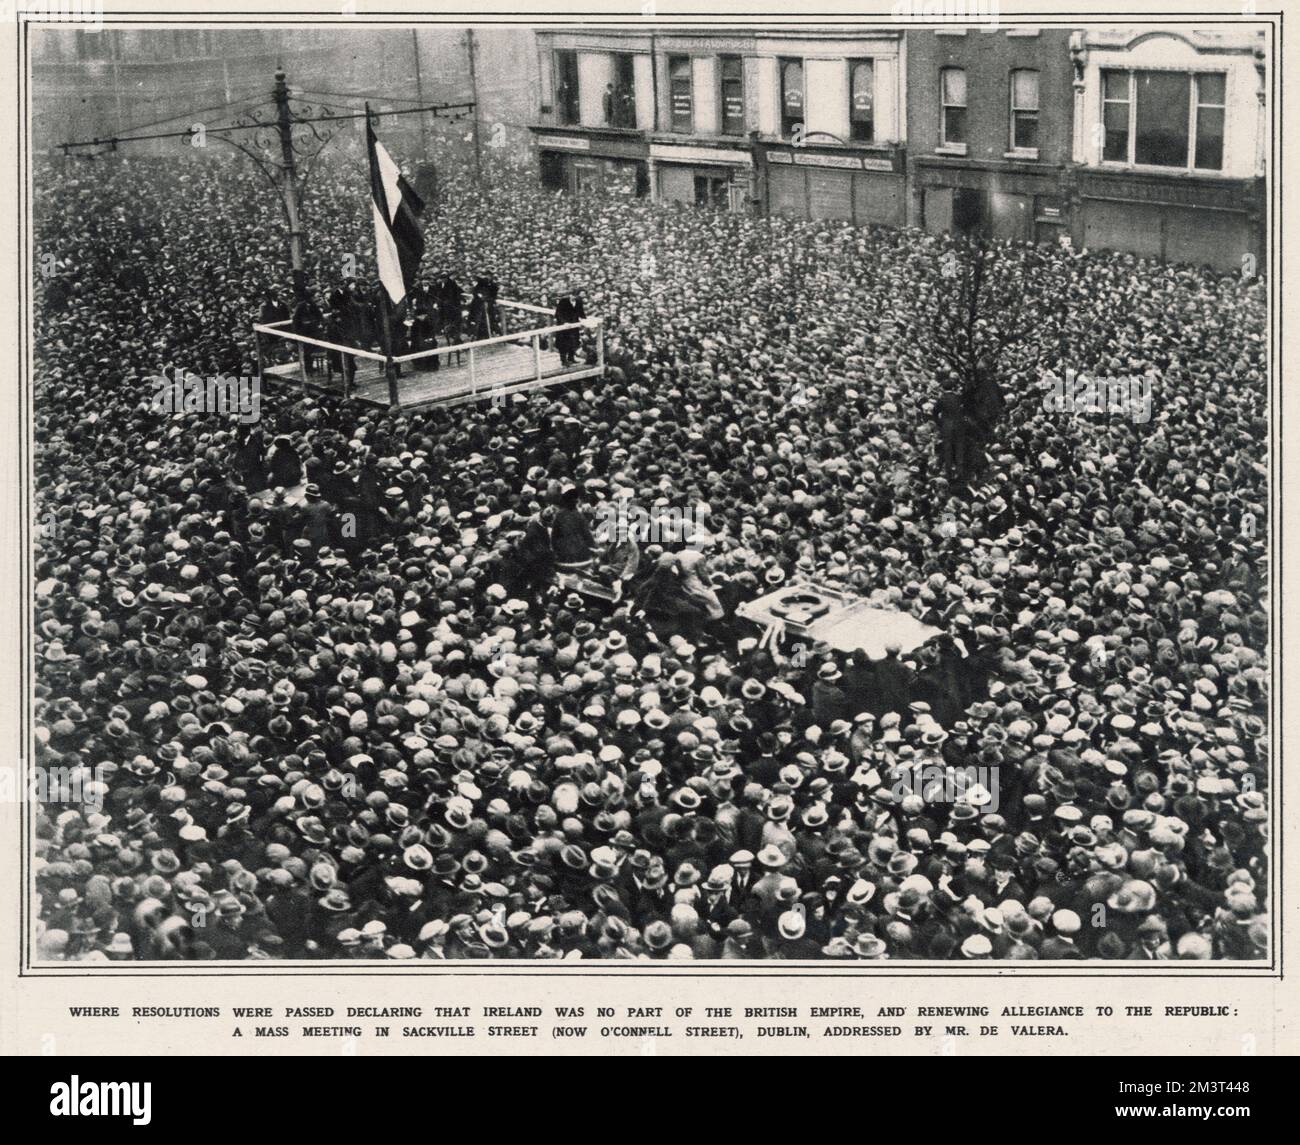 Mass Meeting in Sackville Street (now O'Connell Street), Dublin, Ireland - addressed by President of the Irish Republic Eamon de Valera (1882-1975) - denouncing the Provisional Government. Stock Photo